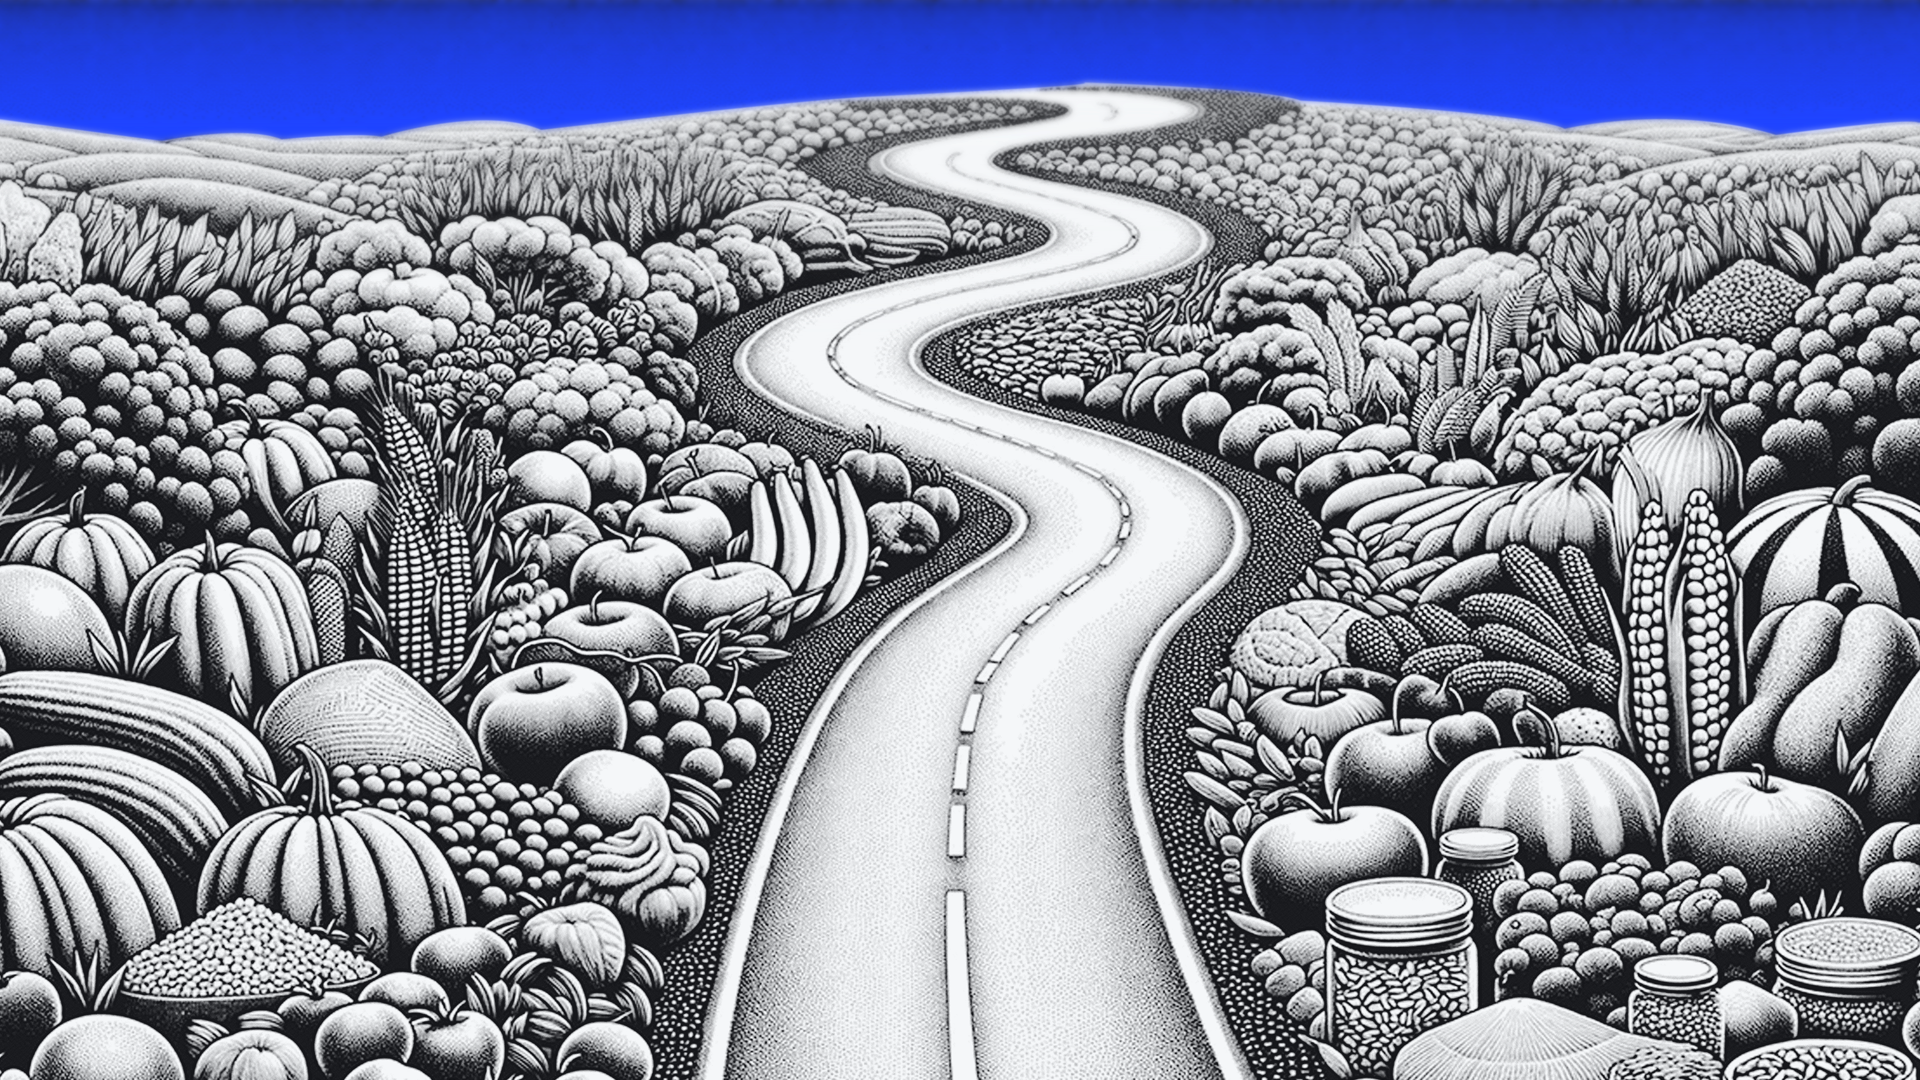 A winding road through a stylized landscape of lush, black and white fruits and vegetables.